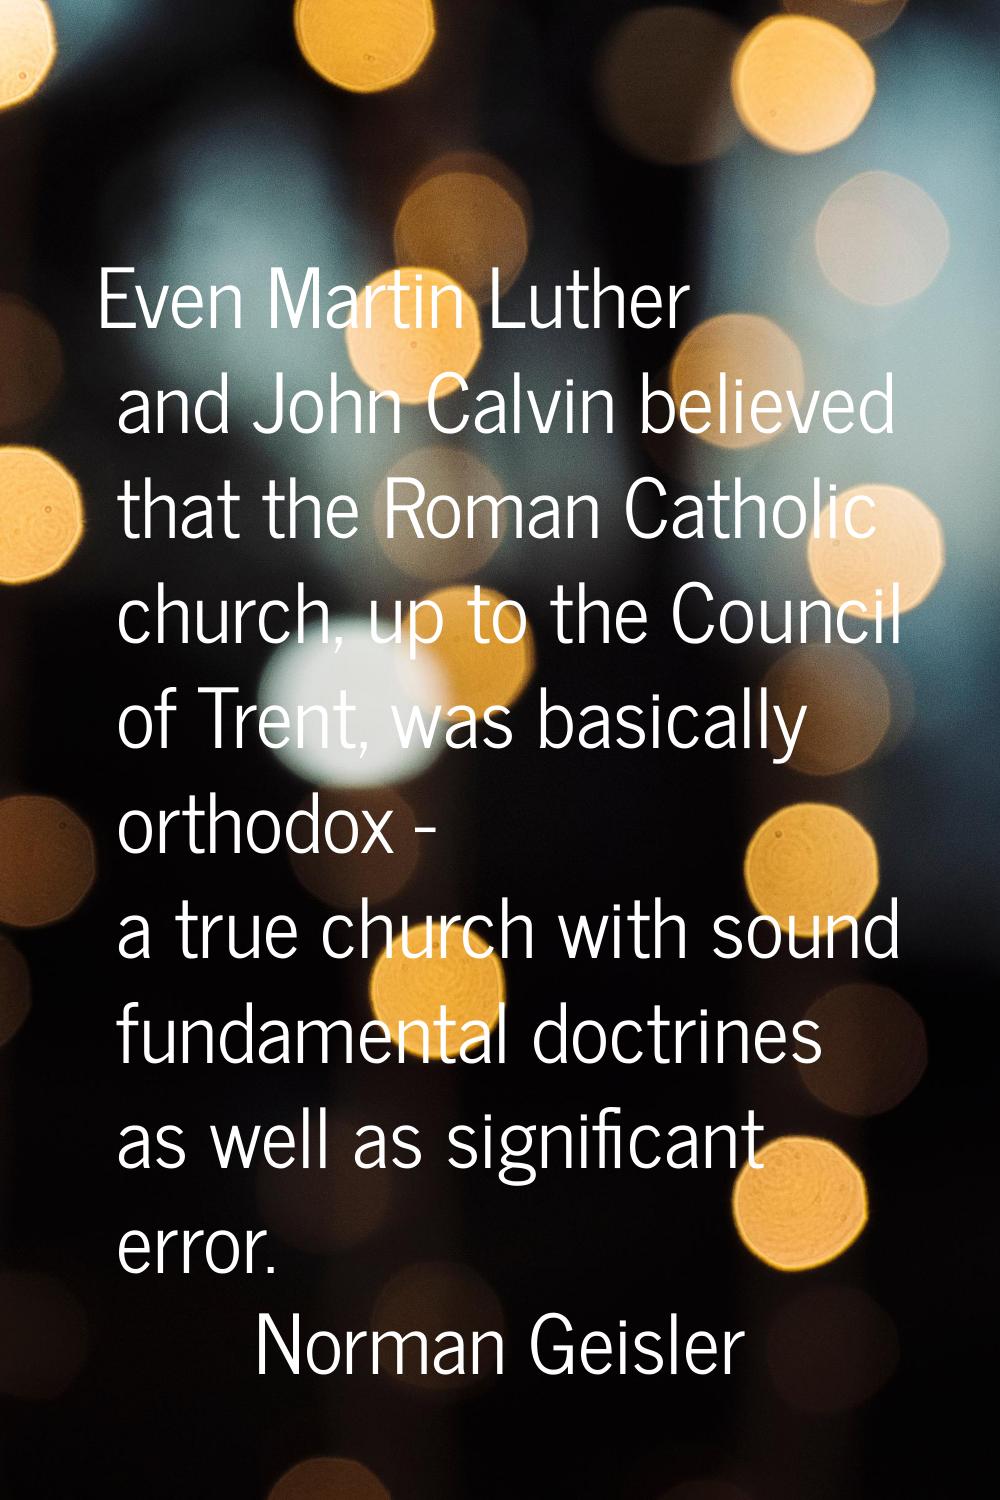 Even Martin Luther and John Calvin believed that the Roman Catholic church, up to the Council of Tr